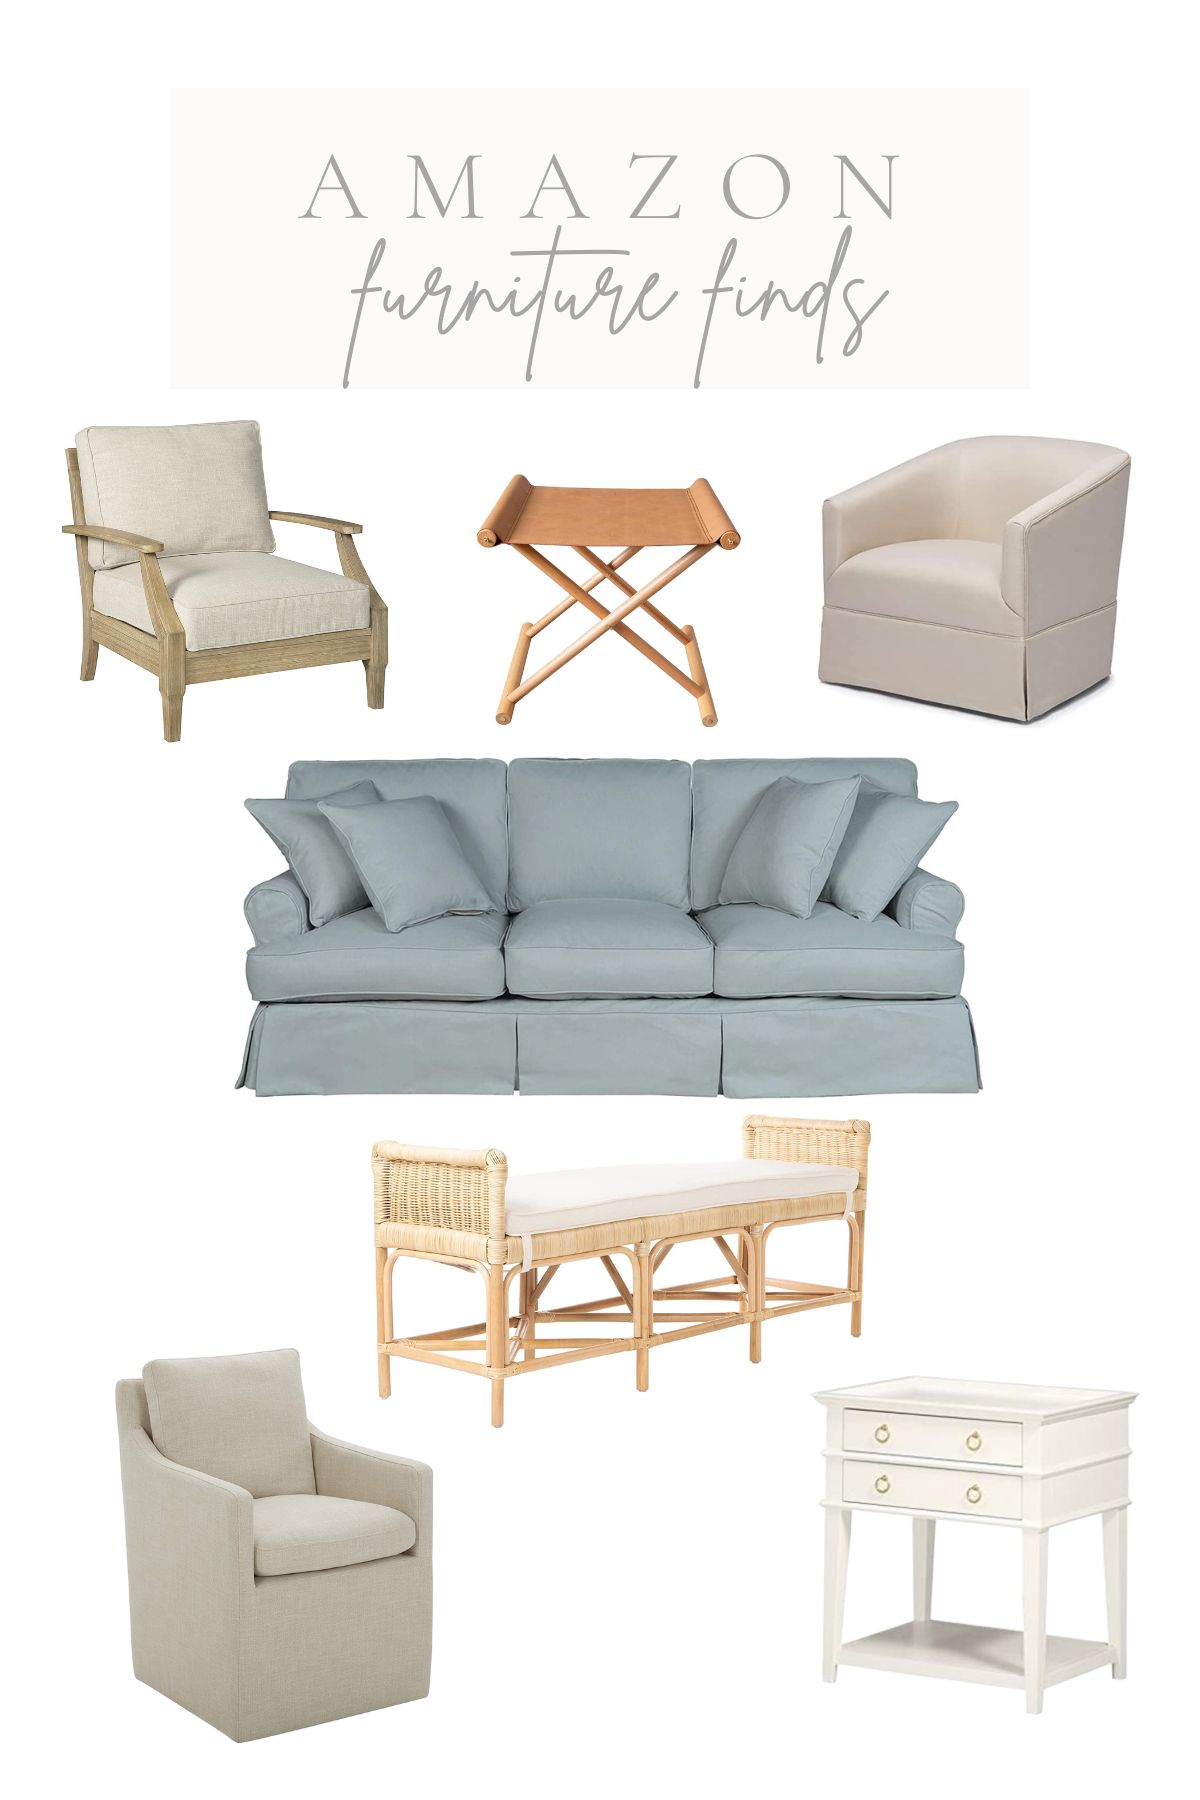 A white graphic with Amazon furniture arrangement throughout, text at the top reads 